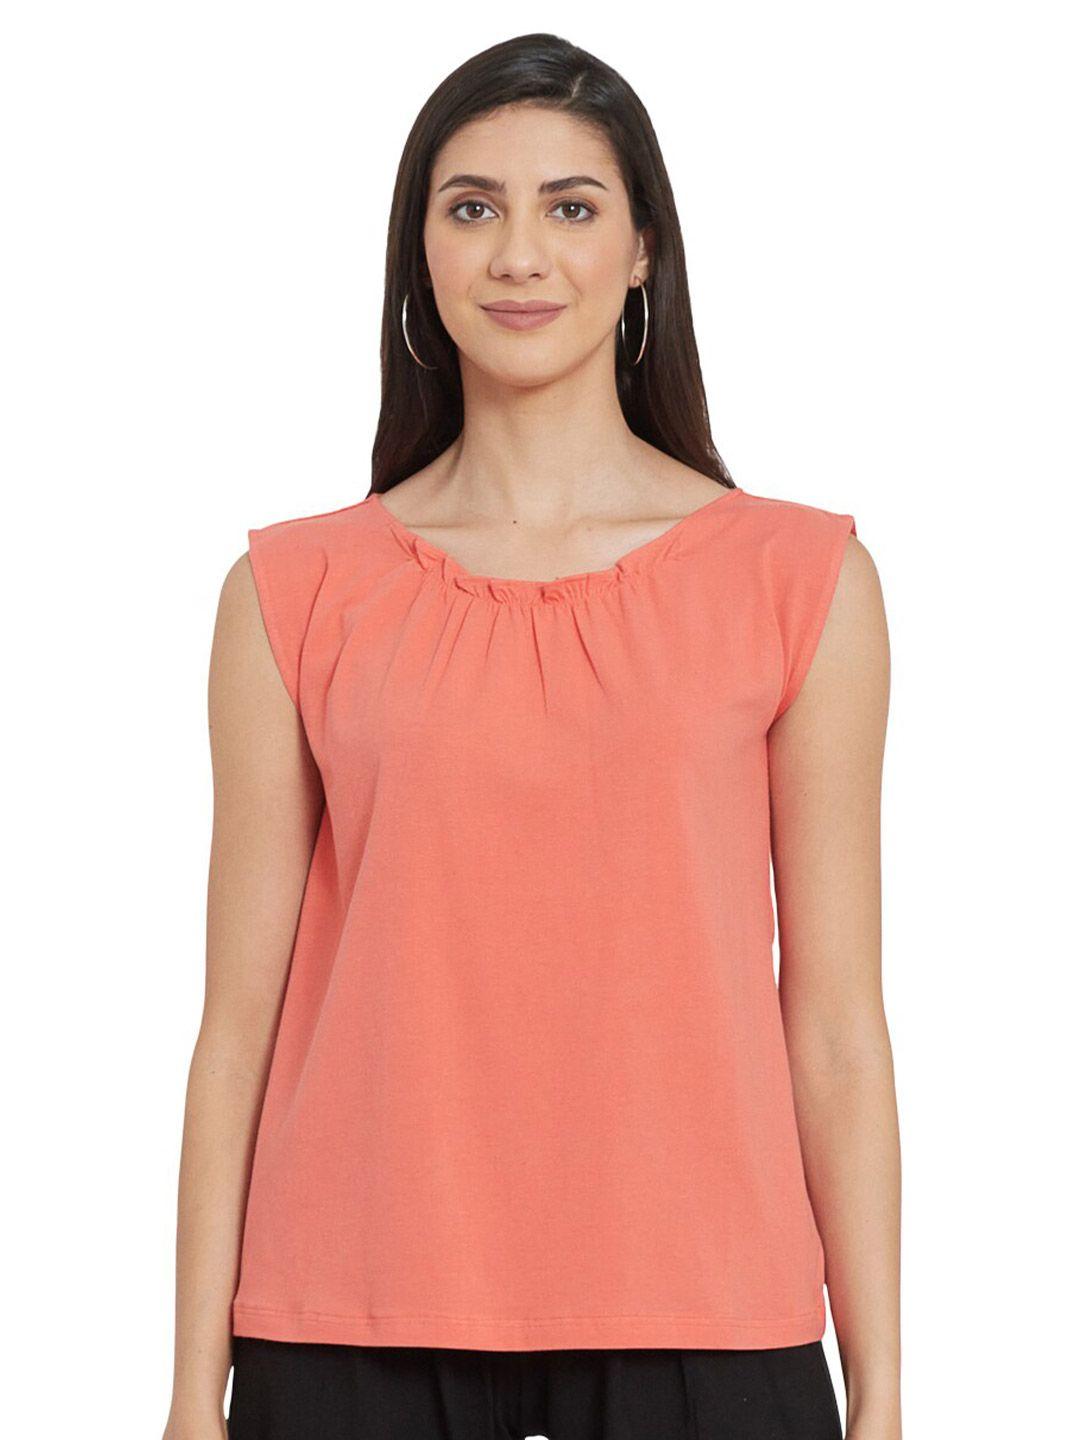 unmade-women-coral-solid-top